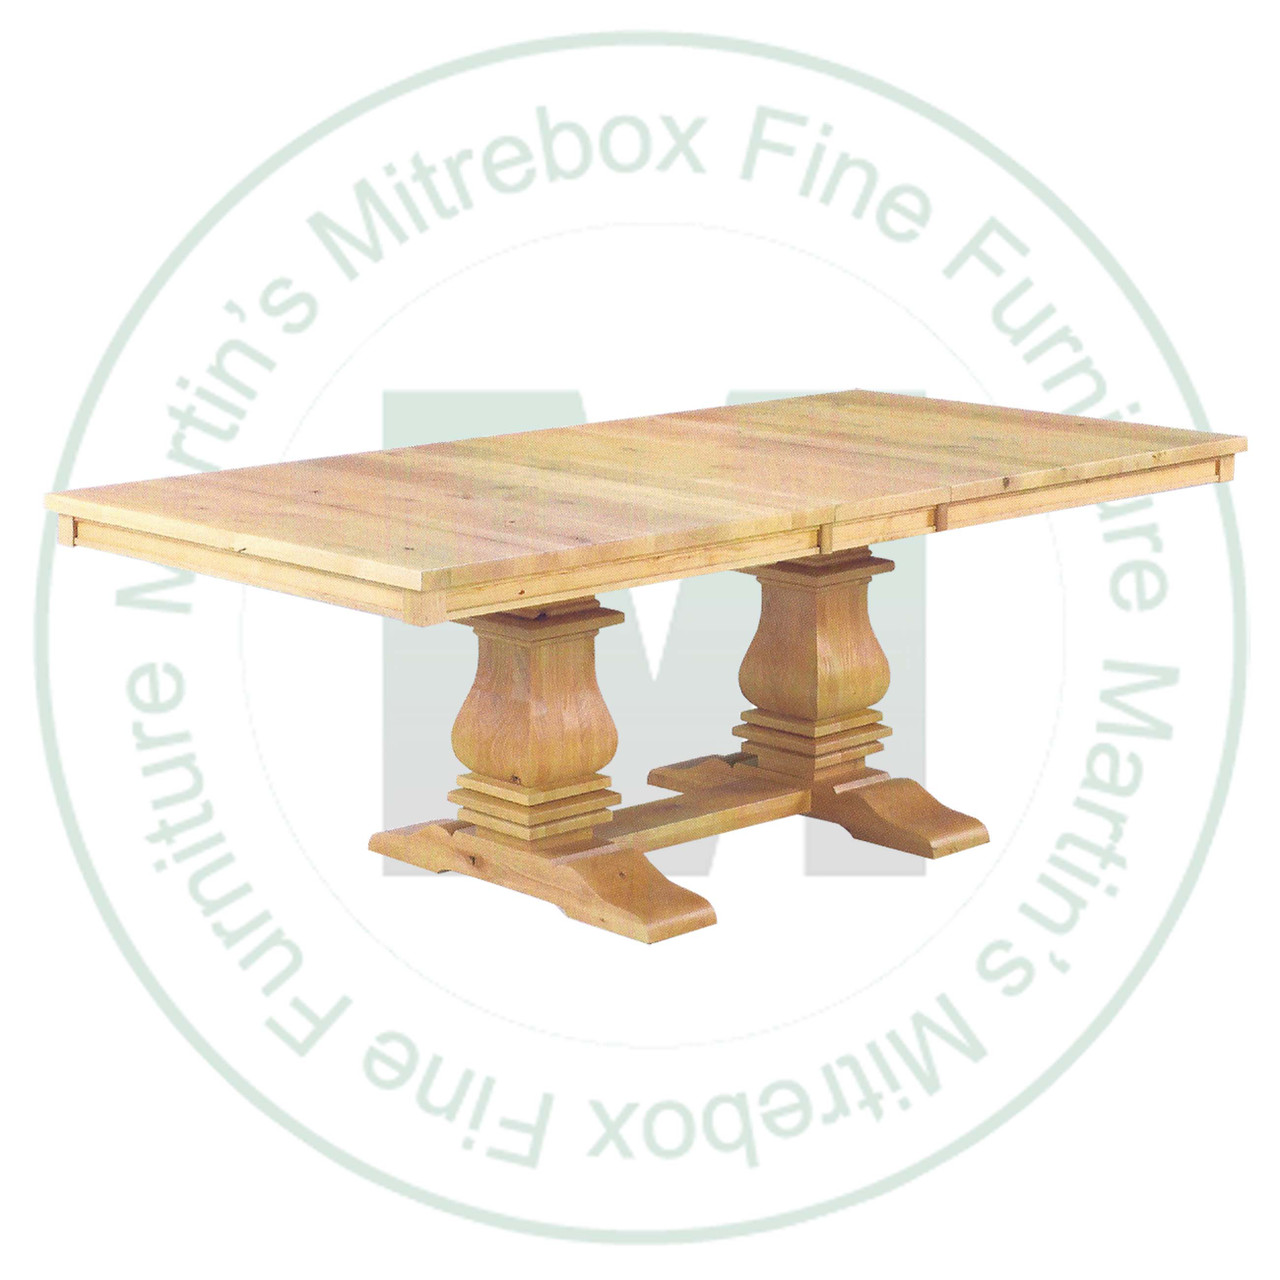 Oak Mediterranean Double Pedestal Table 42''D x 84''W x 30''H With 2 - 12'' Leaves. Table Has 1.25'' Thick Top